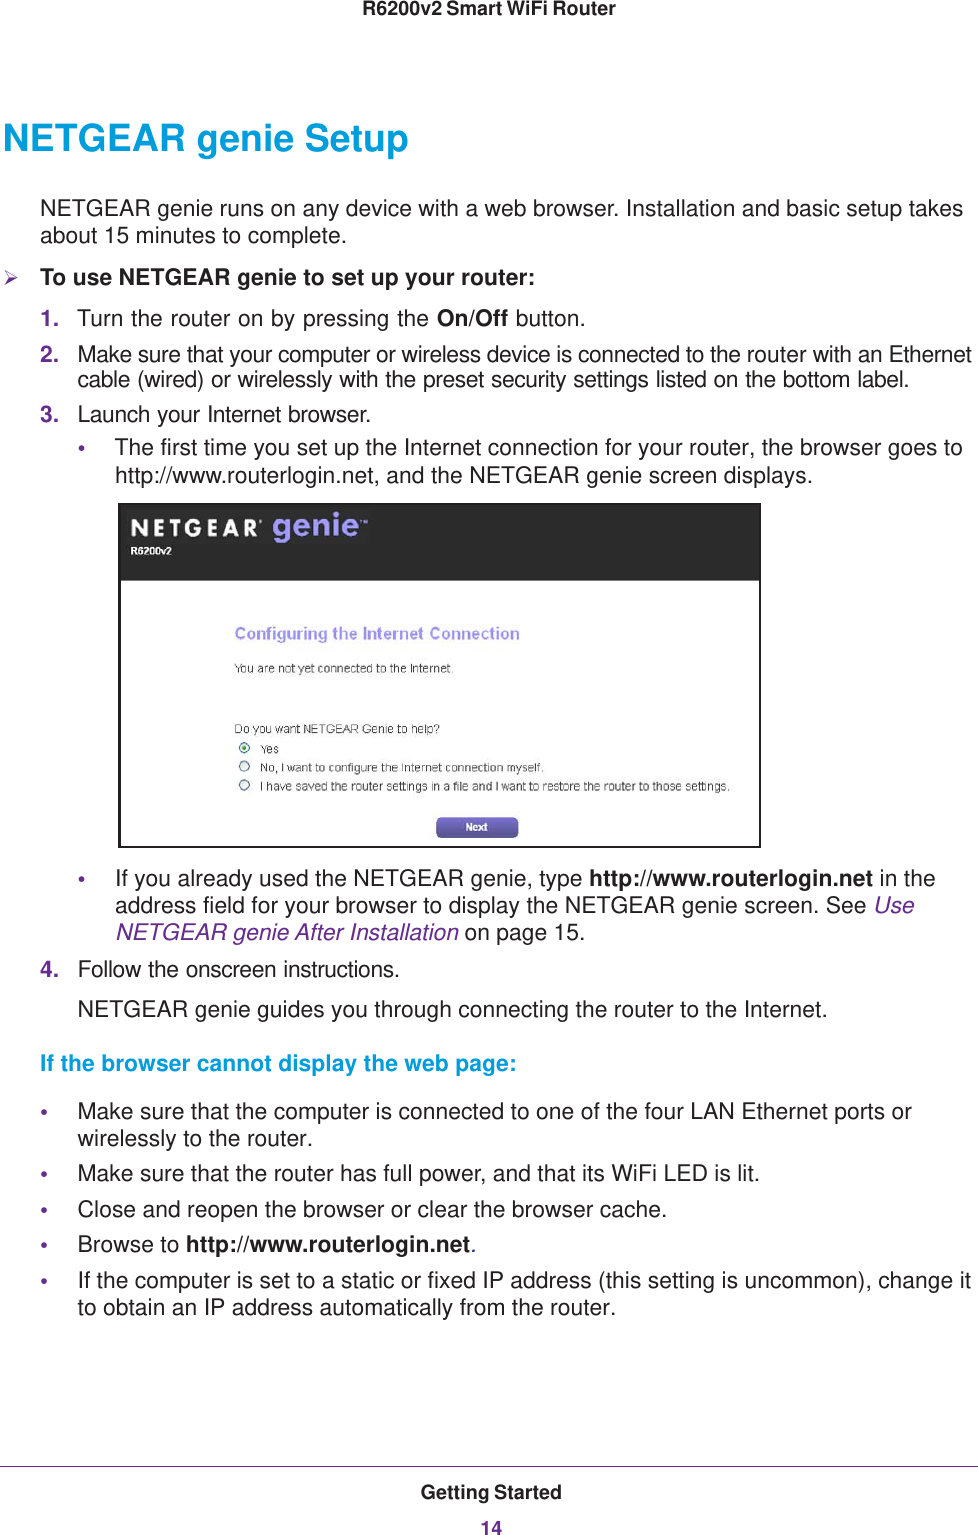 Getting Started14R6200v2 Smart WiFi Router NETGEAR genie SetupNETGEAR genie runs on any device with a web browser. Installation and basic setup takes about 15  minutes to complete. To use NETGEAR genie to set up your router:1. Turn the router on by pressing the On/Off button. 2. Make sure that your computer or wireless device is connected to the router with an Ethernet cable (wired) or wirelessly with the preset security settings listed on the bottom label.3. Launch your Internet browser.•The first time you set up the Internet connection for your router, the browser goes to http://www.routerlogin.net, and the NETGEAR genie screen displays.•If you already used the NETGEAR genie, type http://www.routerlogin.net in the address field for your browser to display the NETGEAR genie screen. See Use NETGEAR genie After Installation on page  15.4. Follow the onscreen instructions.NETGEAR genie guides you through connecting the router to the Internet. If the browser cannot display the web page: •Make sure that the computer is connected to one of the four LAN Ethernet ports or wirelessly to the router.•Make sure that the router has full power, and that its WiFi LED is lit.•Close and reopen the browser or clear the browser cache.•Browse to http://www.routerlogin.net.•If the computer is set to a static or fixed IP address (this setting is uncommon), change it to obtain an IP address automatically from the router.